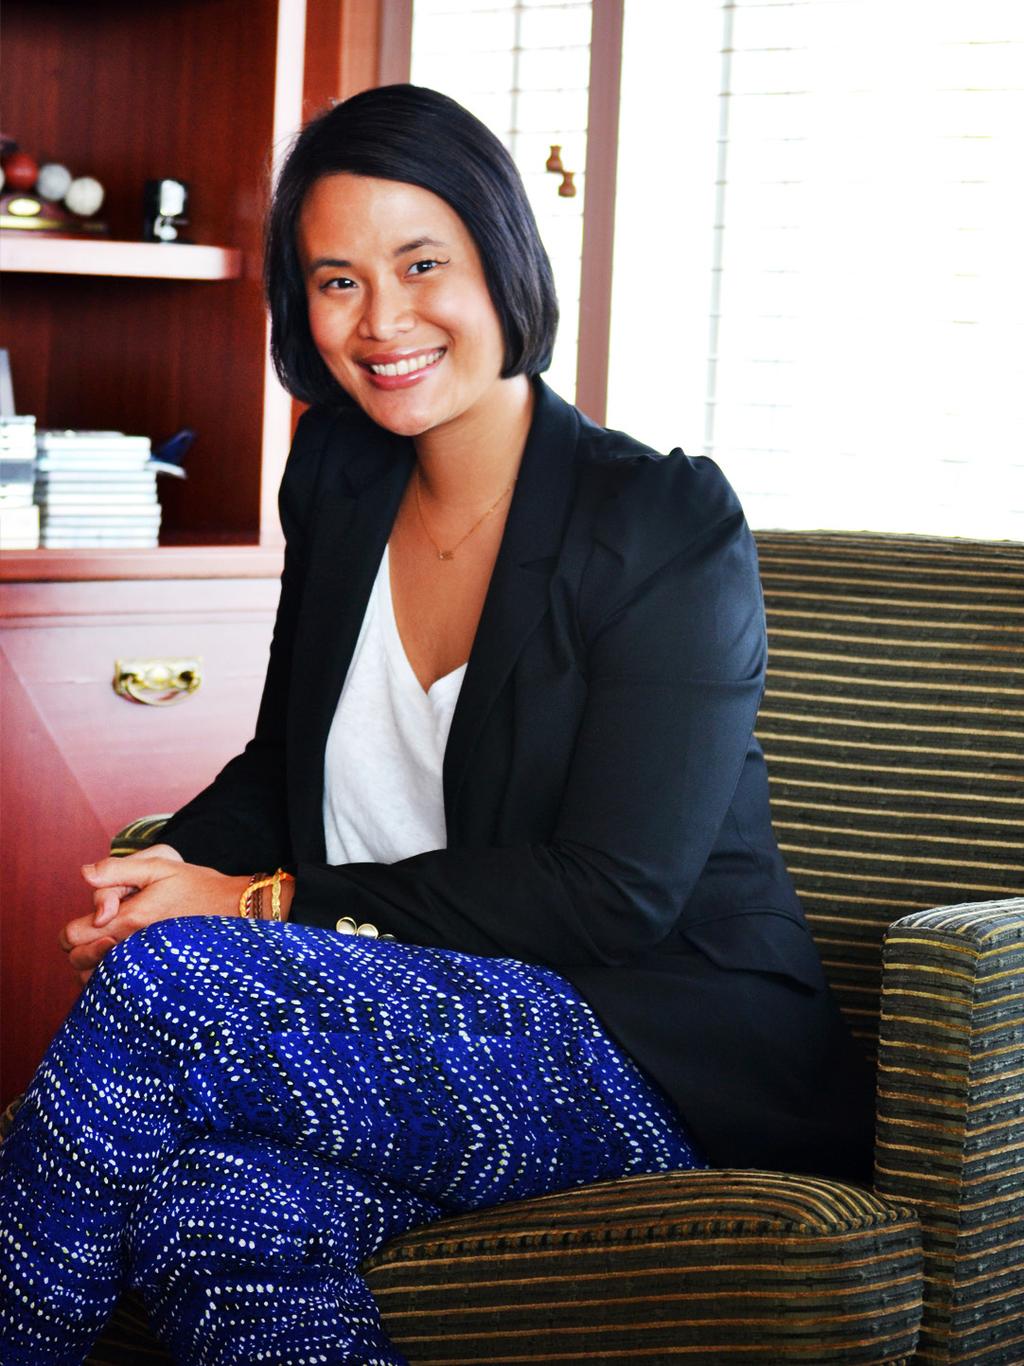 INSTYLE EMILY SUBRATA: SUDAMALA RESORTS, WHERE DIVERSITY OF TRADITIONAL ART SOURCED As an hotelier who is so excited, Emily Subrata bring of her passionate style in her position as Director of PT.